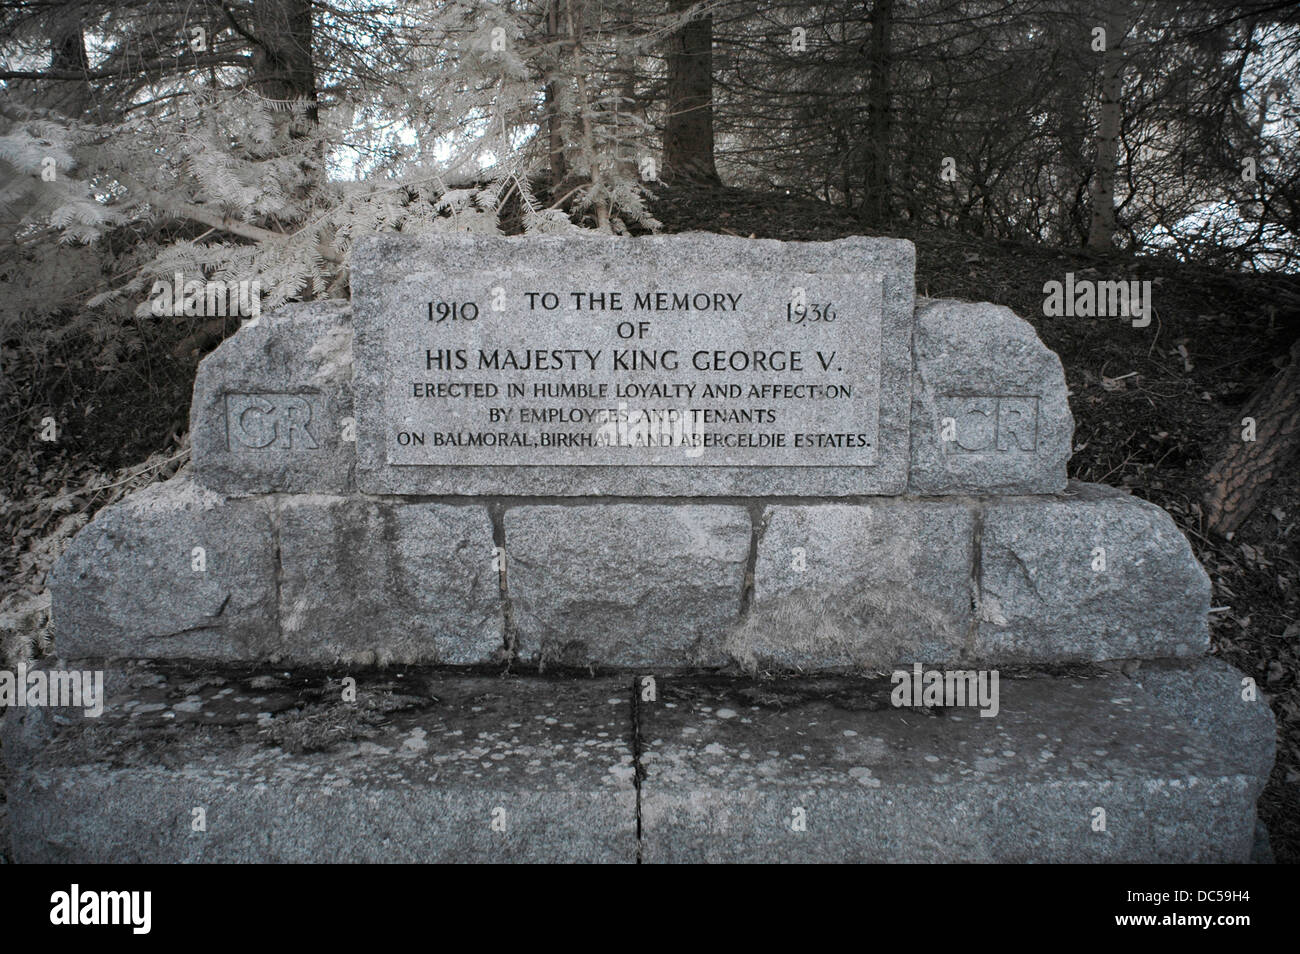 An infrared image of a memorial stone set in the grounds of Balmoral Castle, Royal Deeside, Scotland, UK Stock Photo